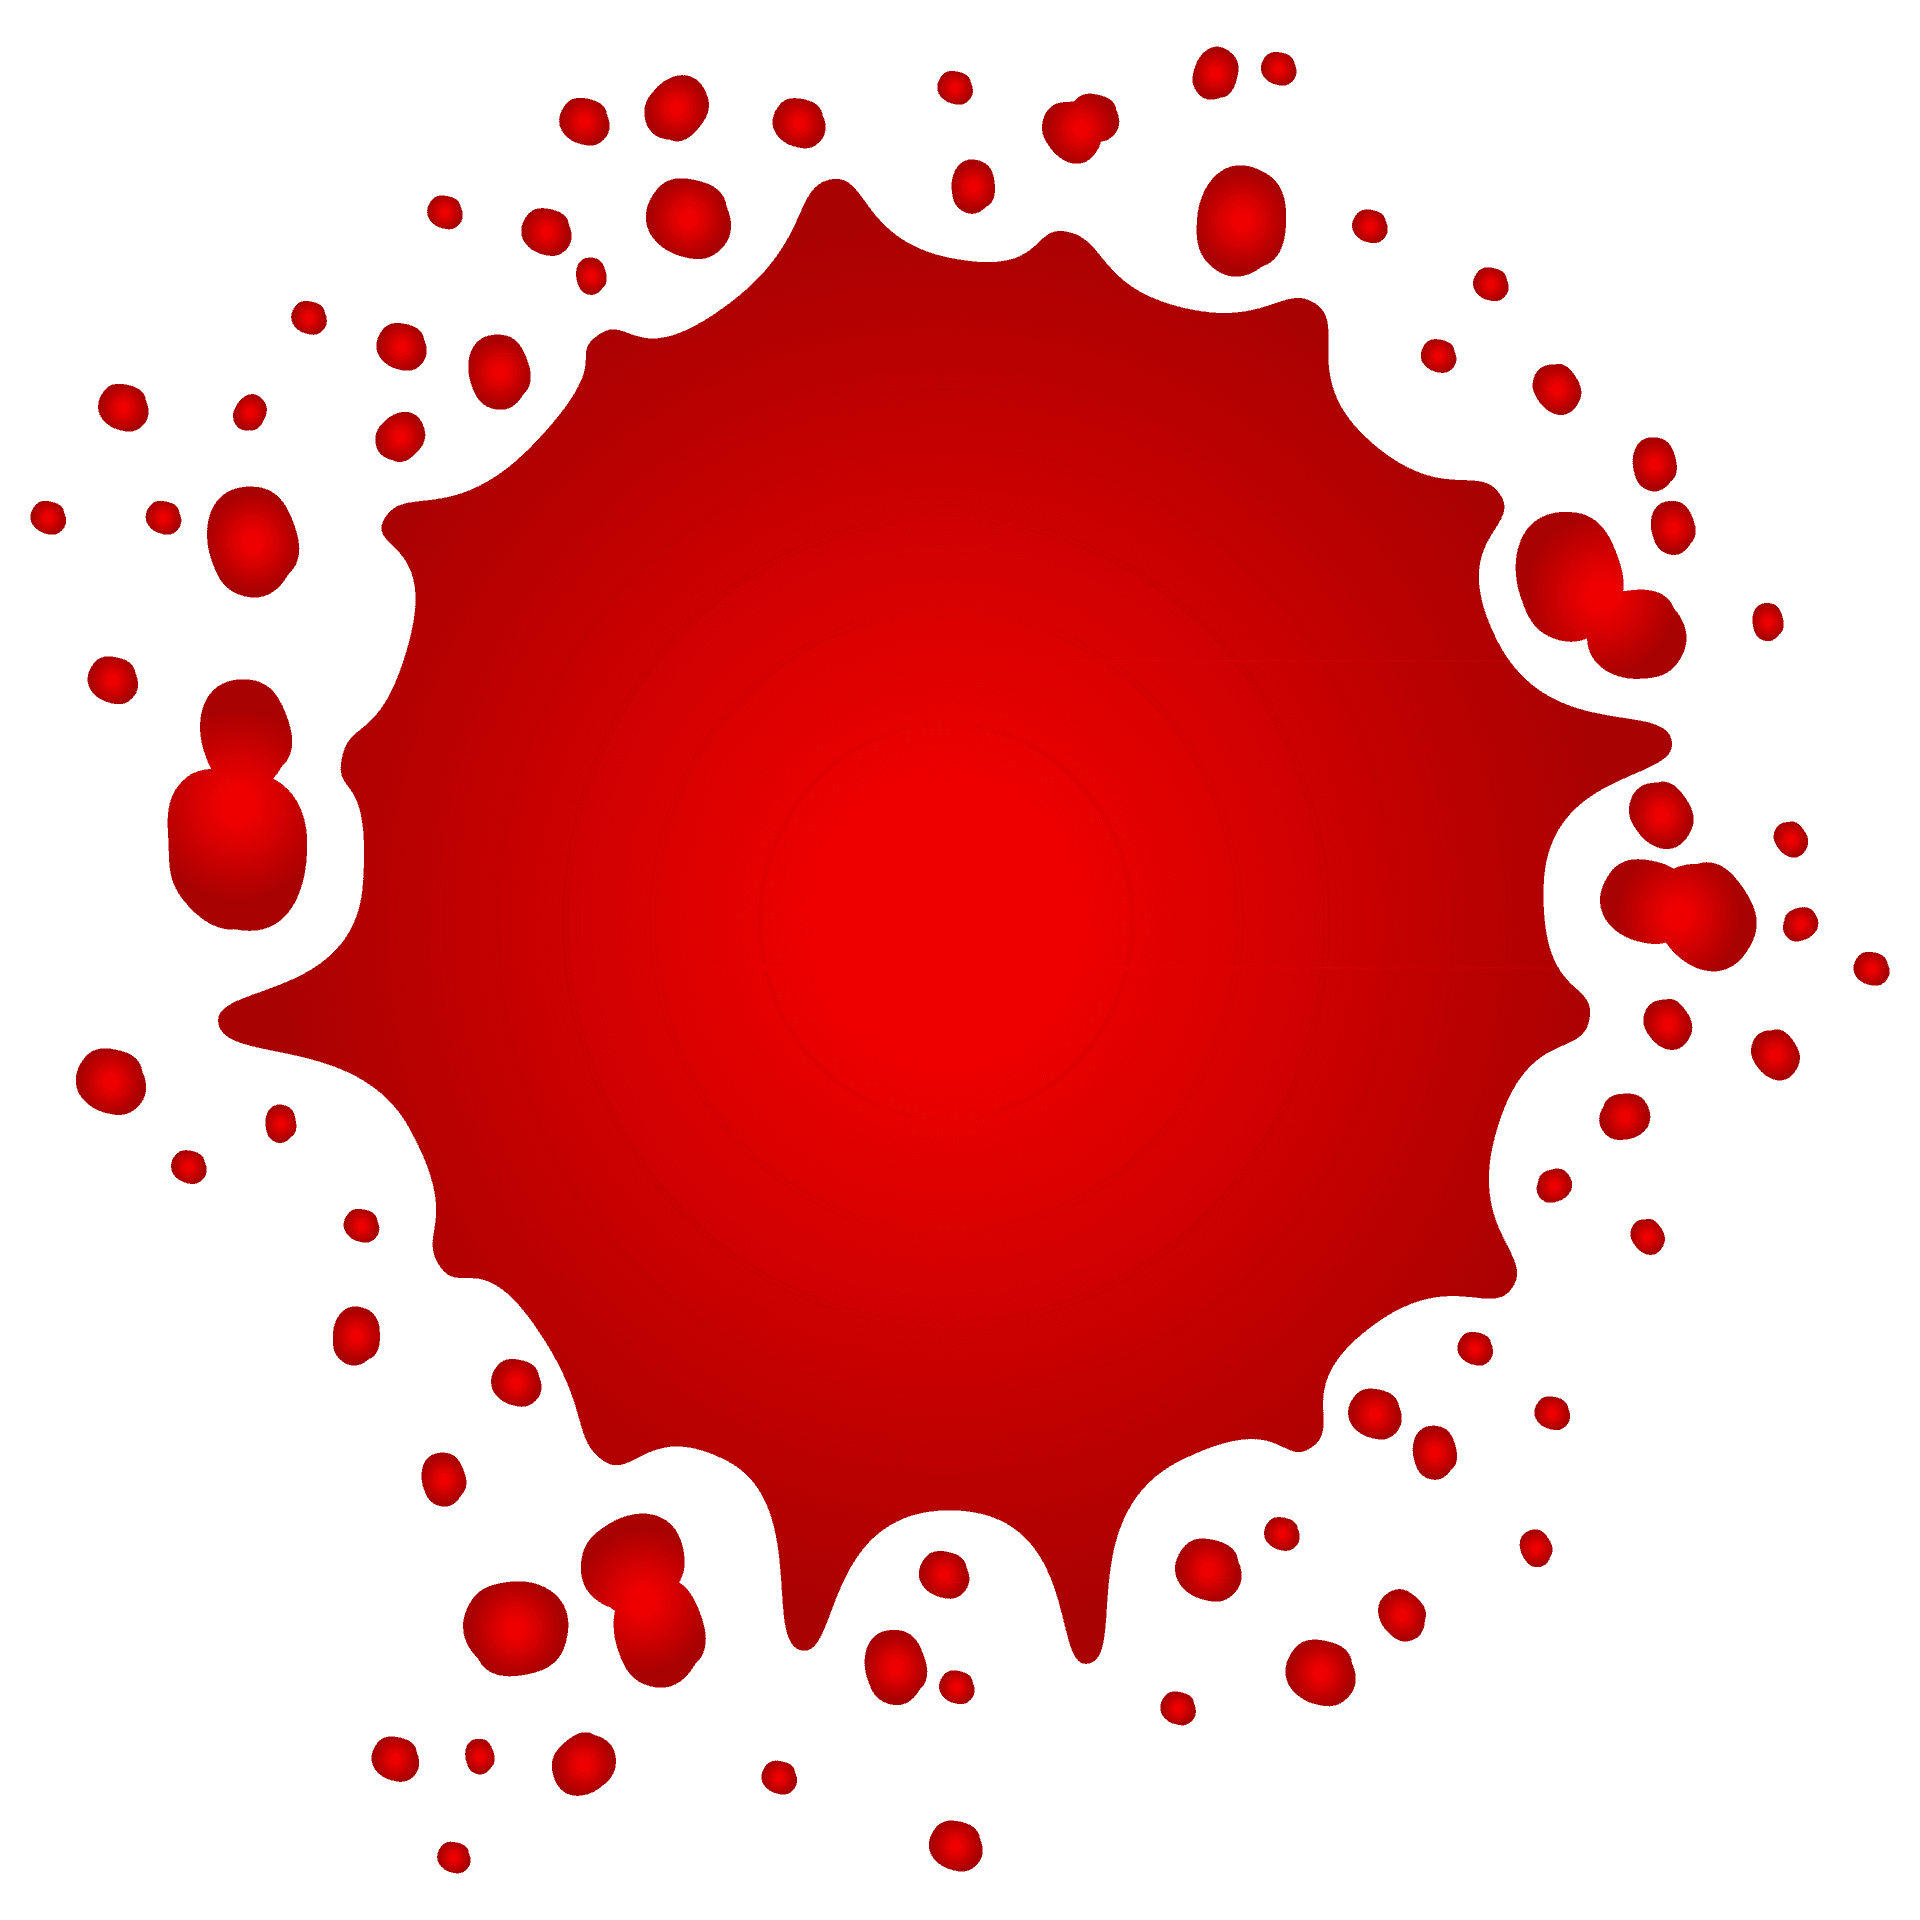 Red Blood Splat Graphic PNG